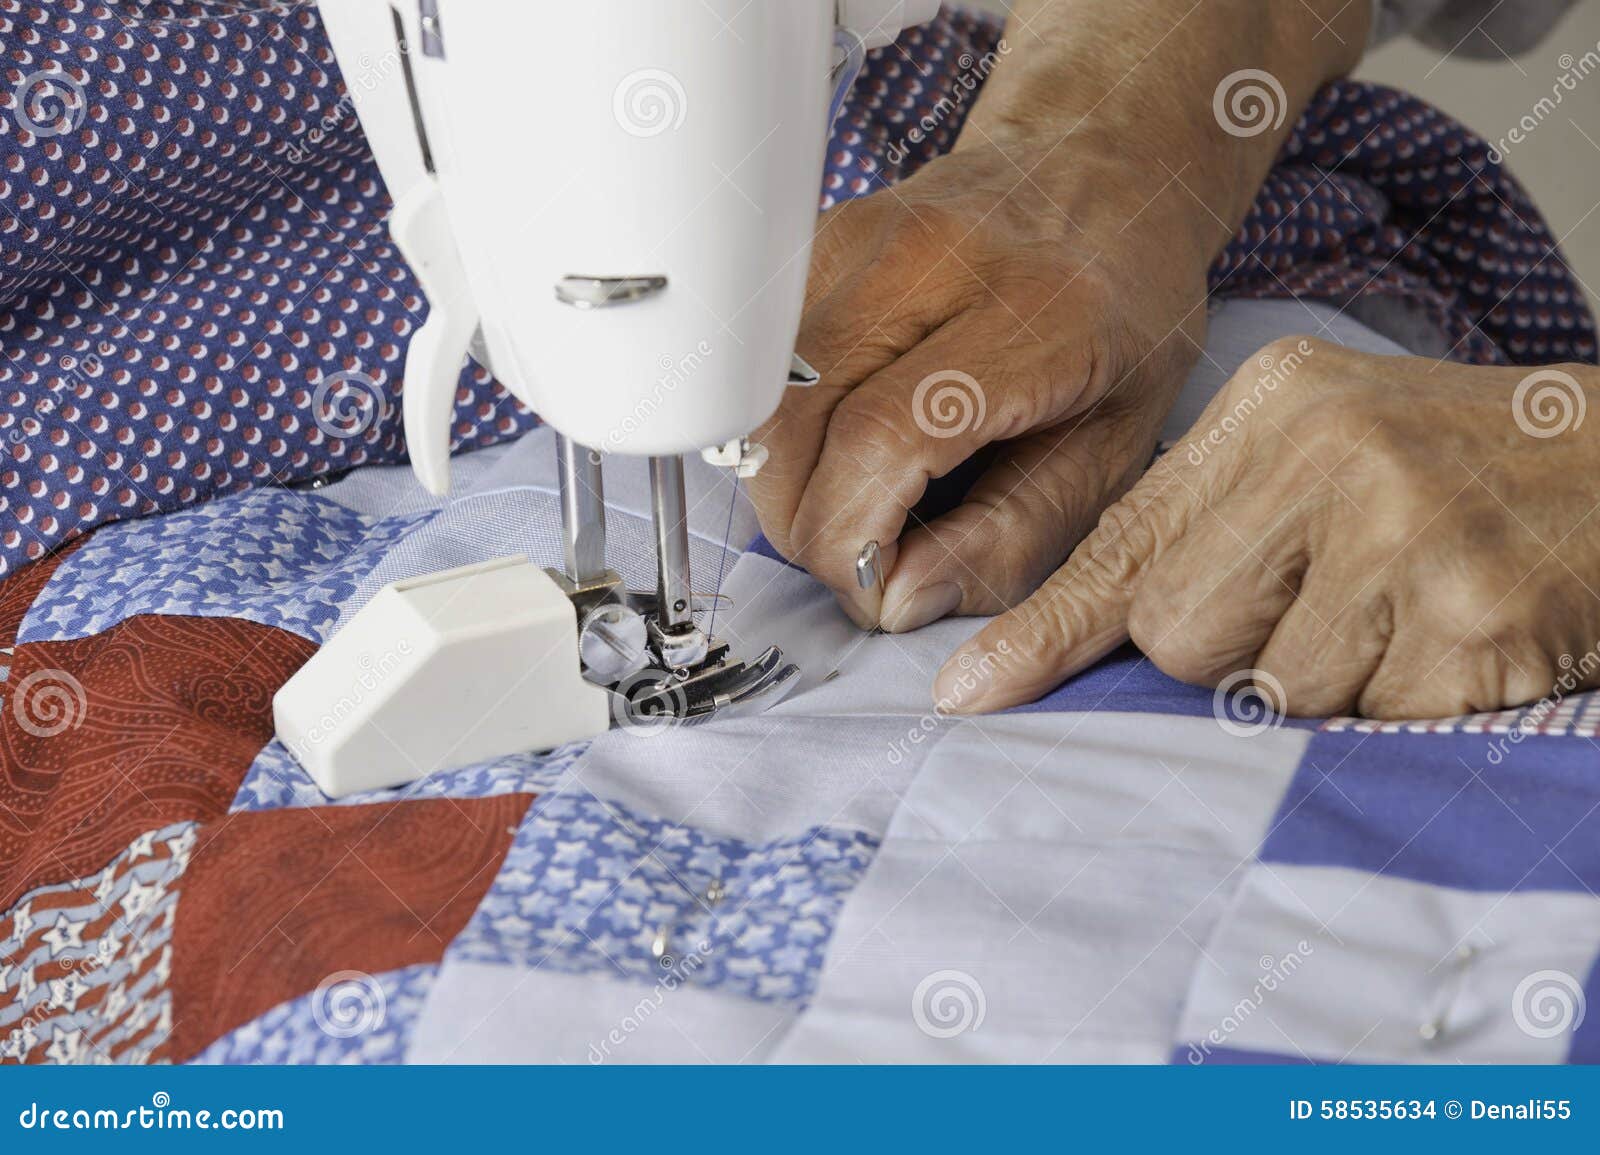 Making of Quilt Binding by Dint of Sewing Quilting Clips by Using Sewing  Machine Stock Image - Image of binding, accessories: 190430469